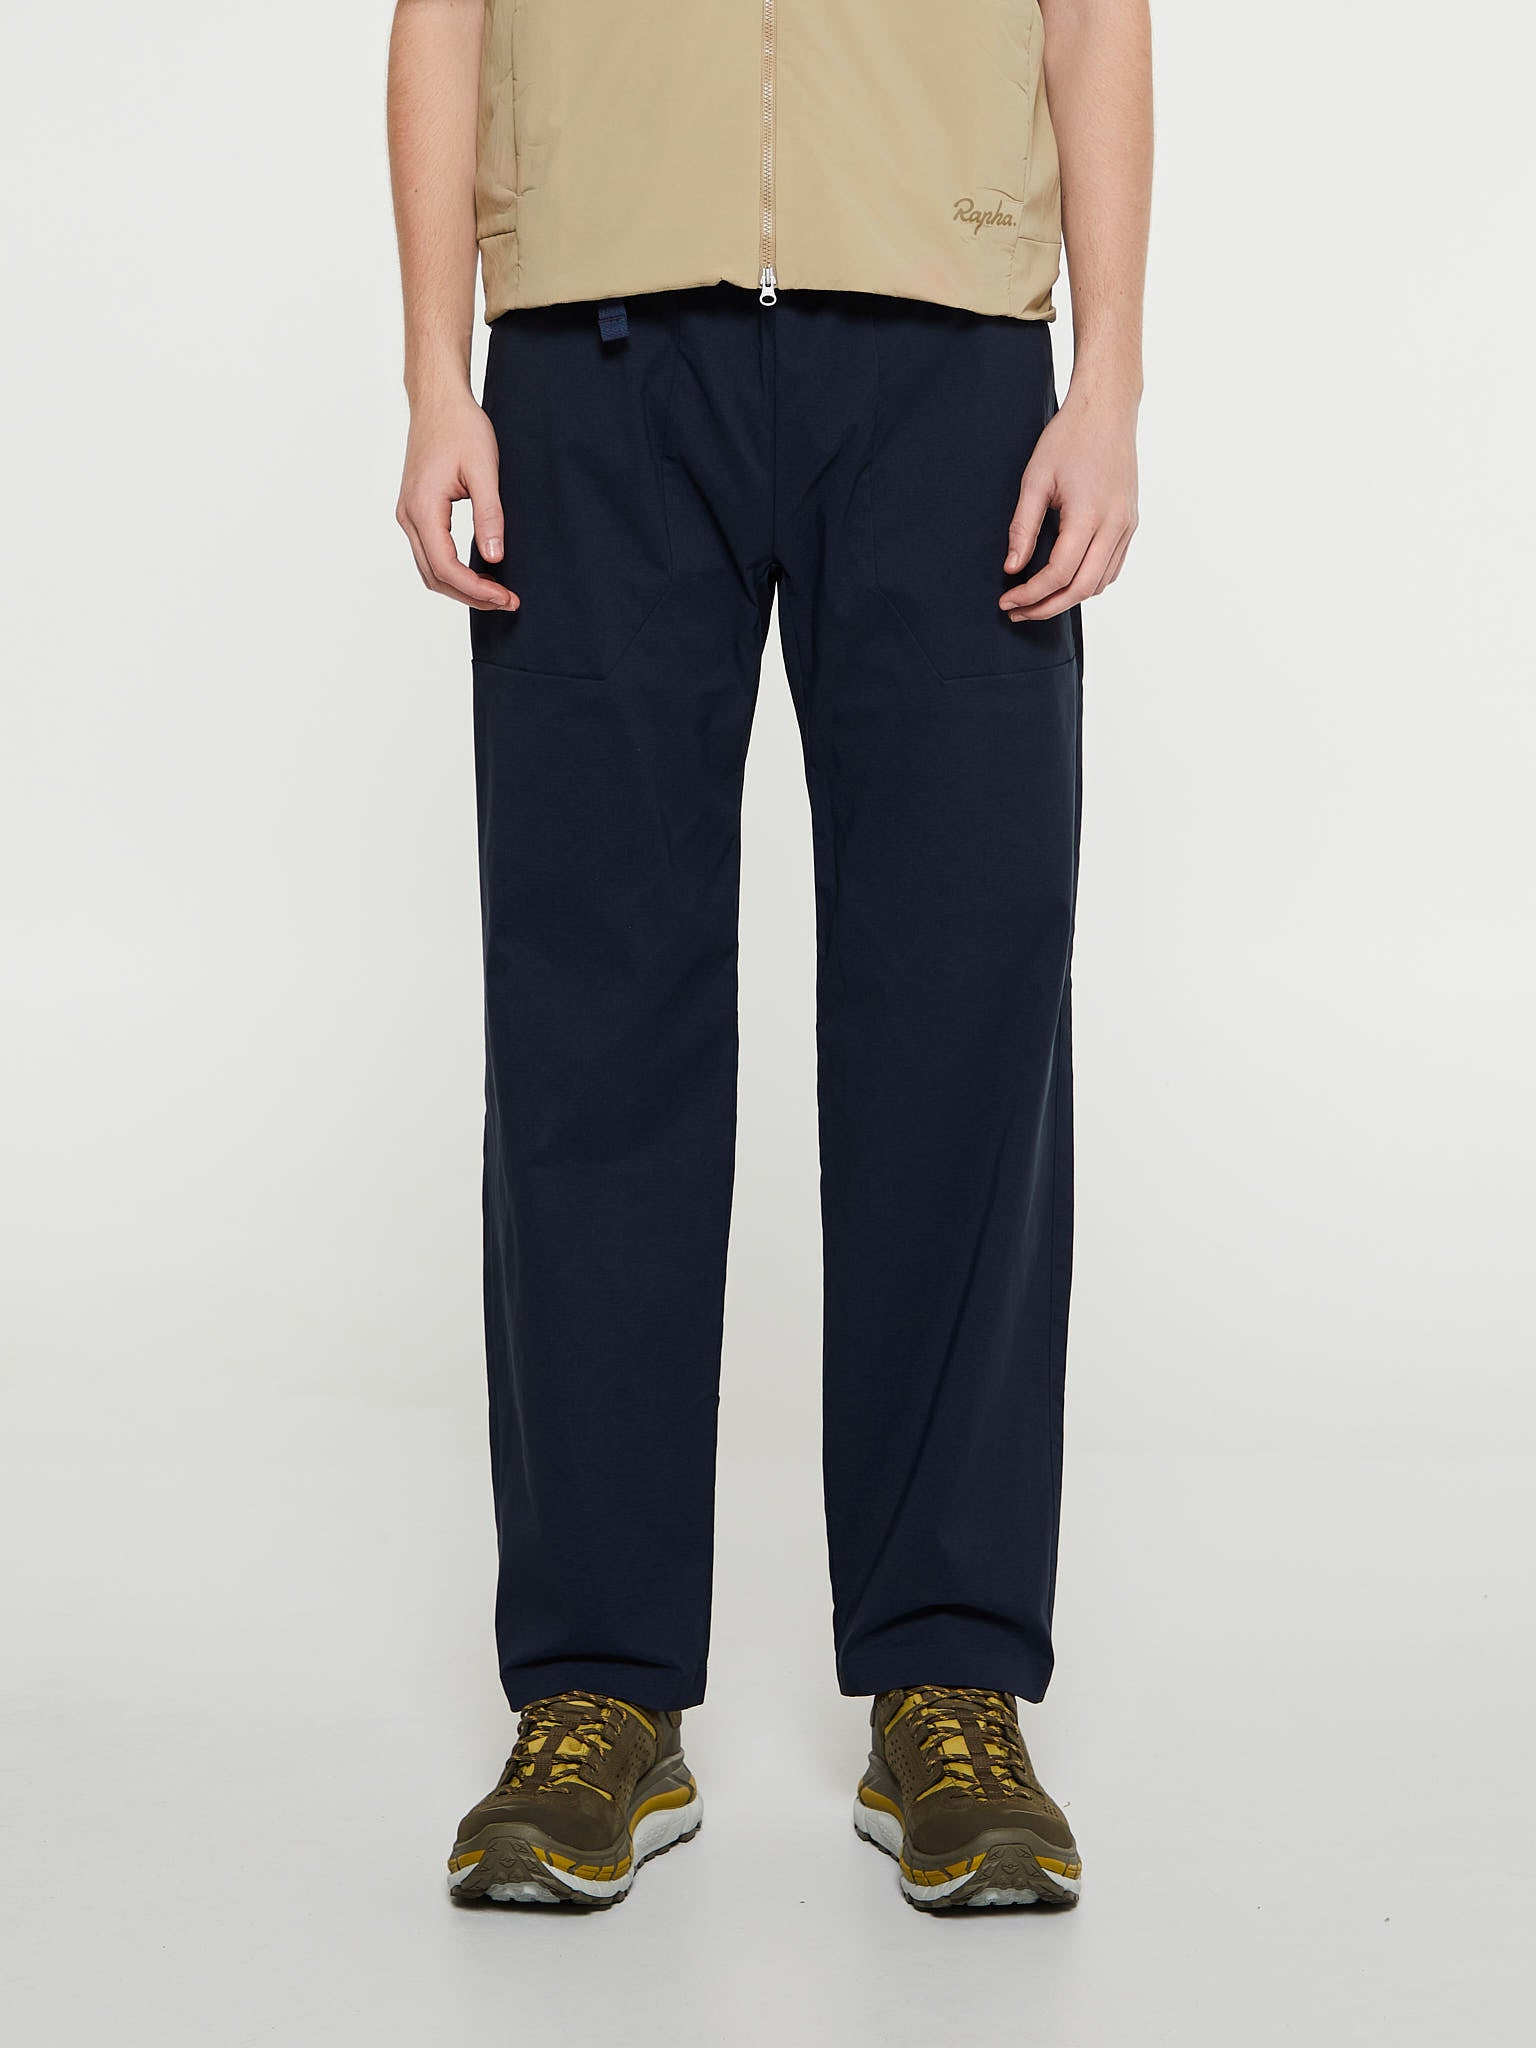 Easy Technical Pants in Dark Navy and Black